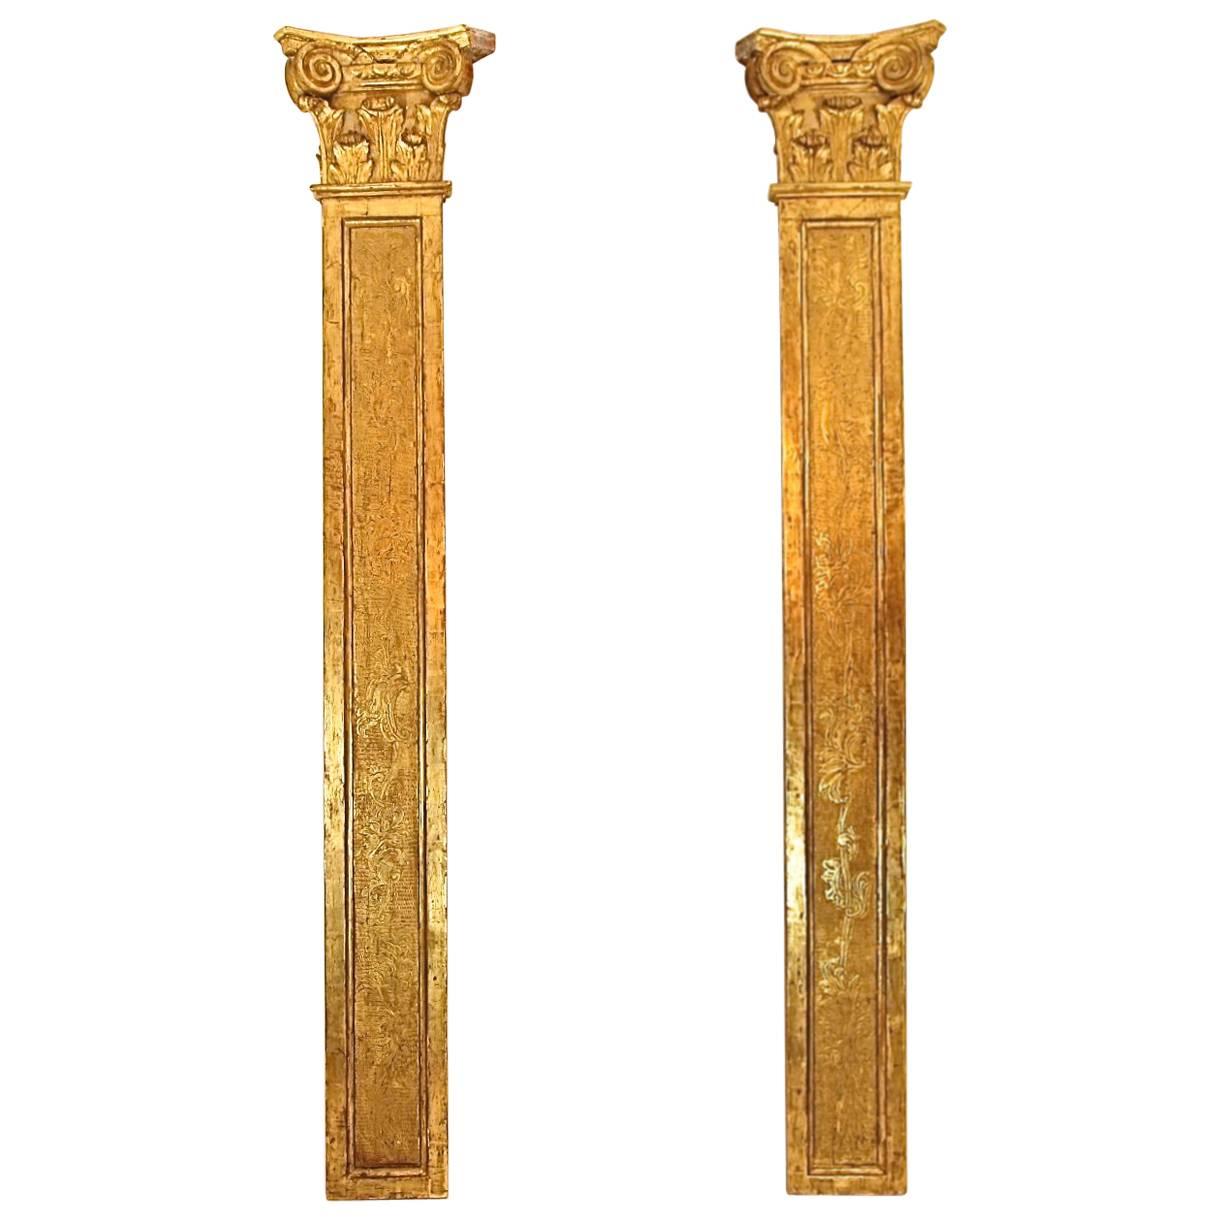 Pair of Early 18th Century Régence Carved Giltwood Pilasters